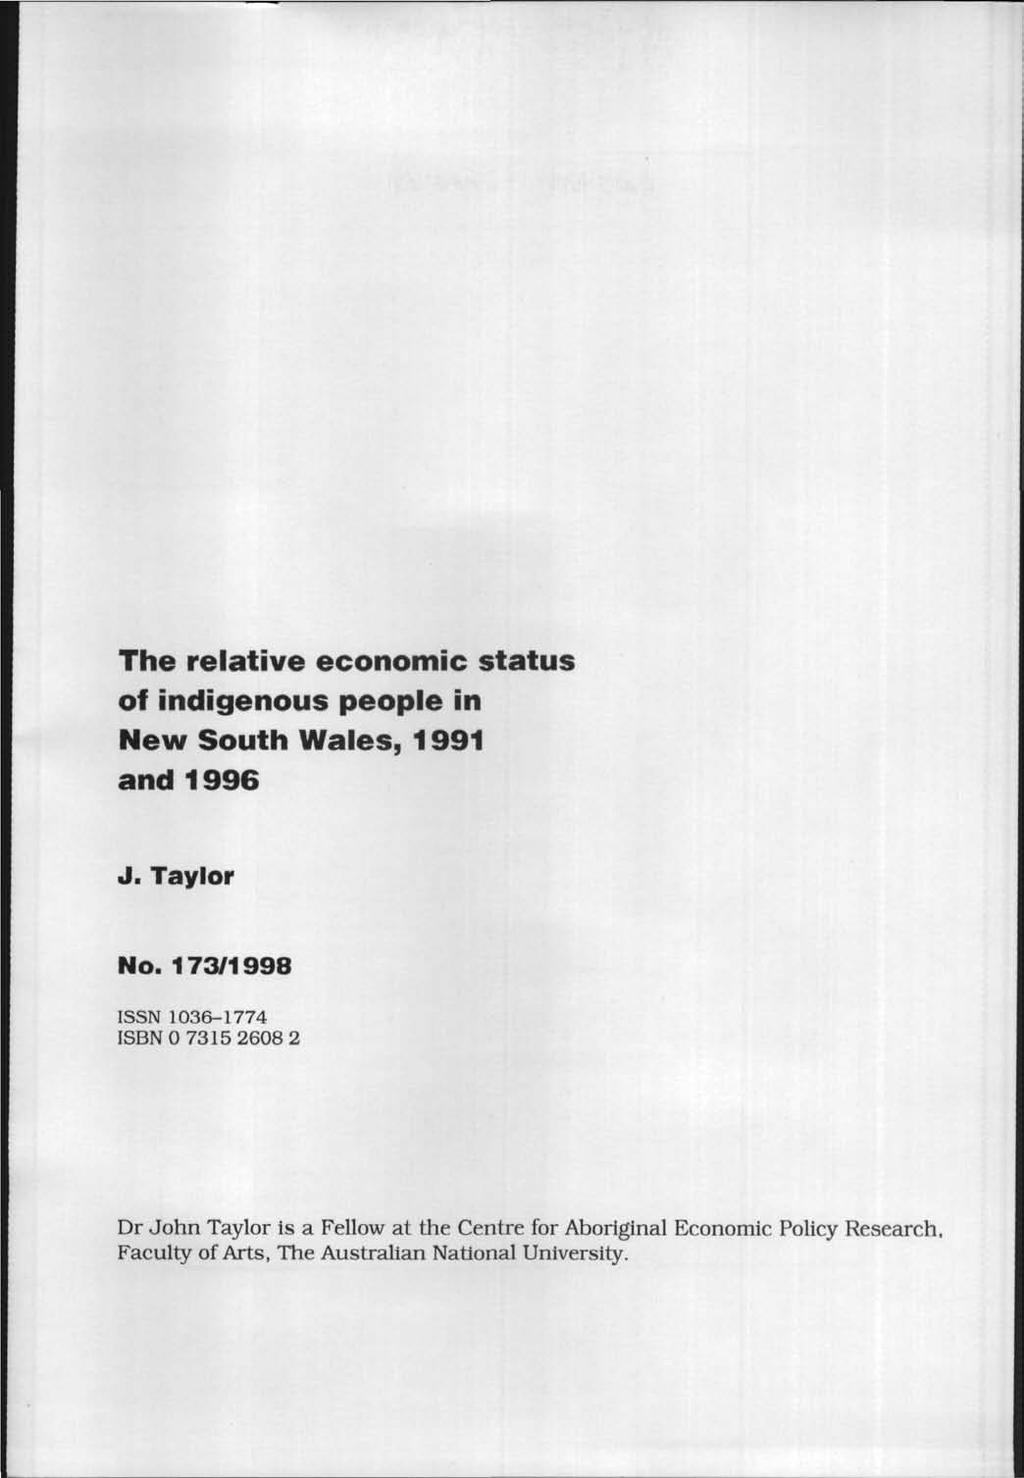 The relative economic status of indigenous people in New South Wales, 1991 and 1996 J. Taylor No.